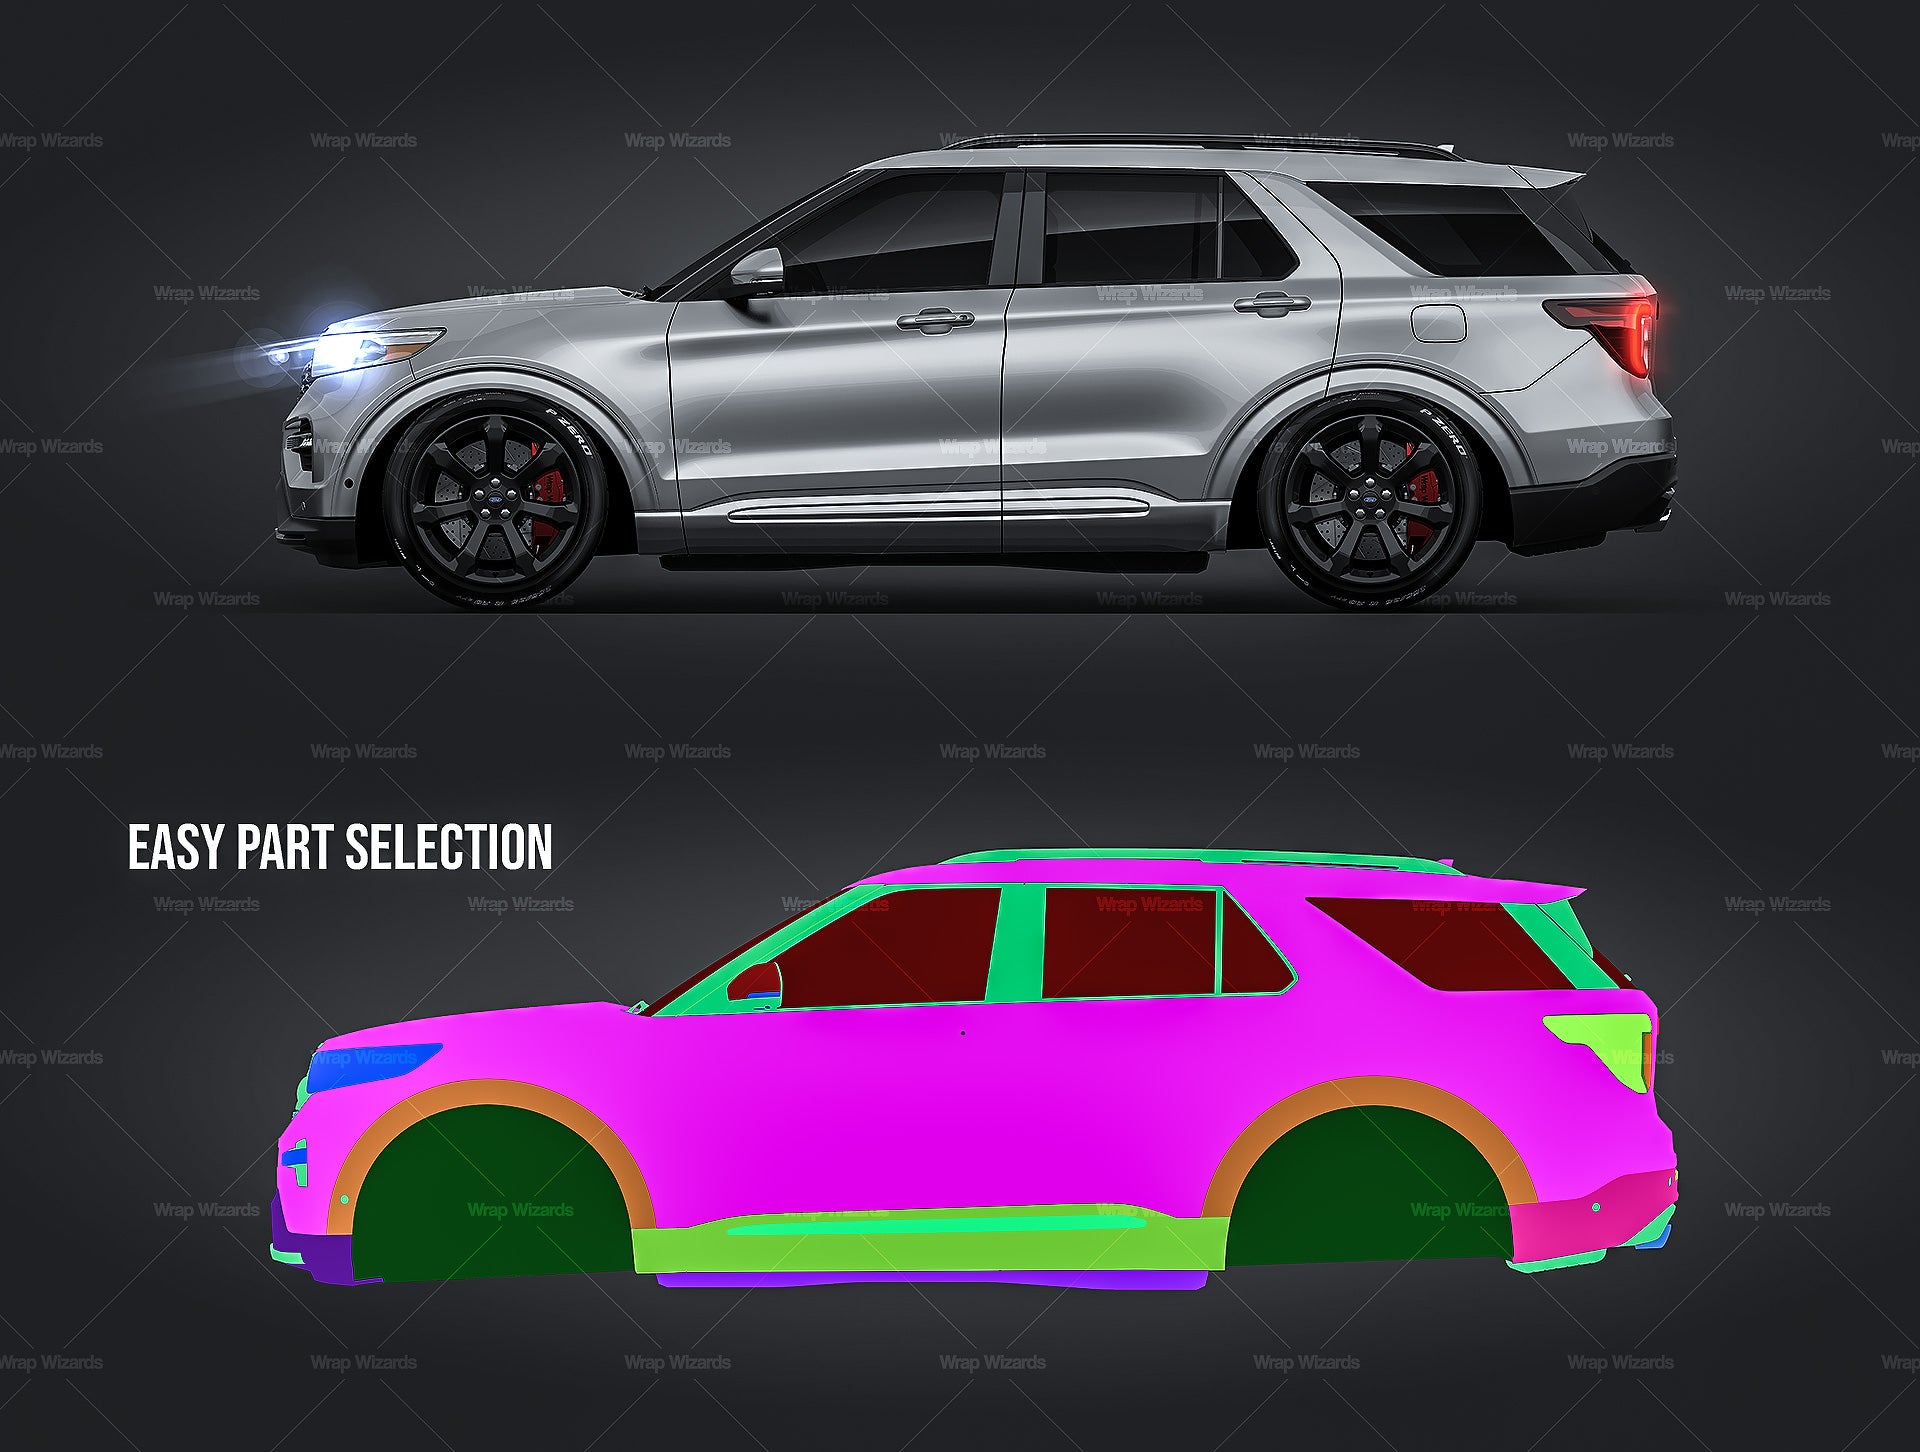 Ford Explorer ST 2020 glossy finish - all sides Car Mockup Template.psd